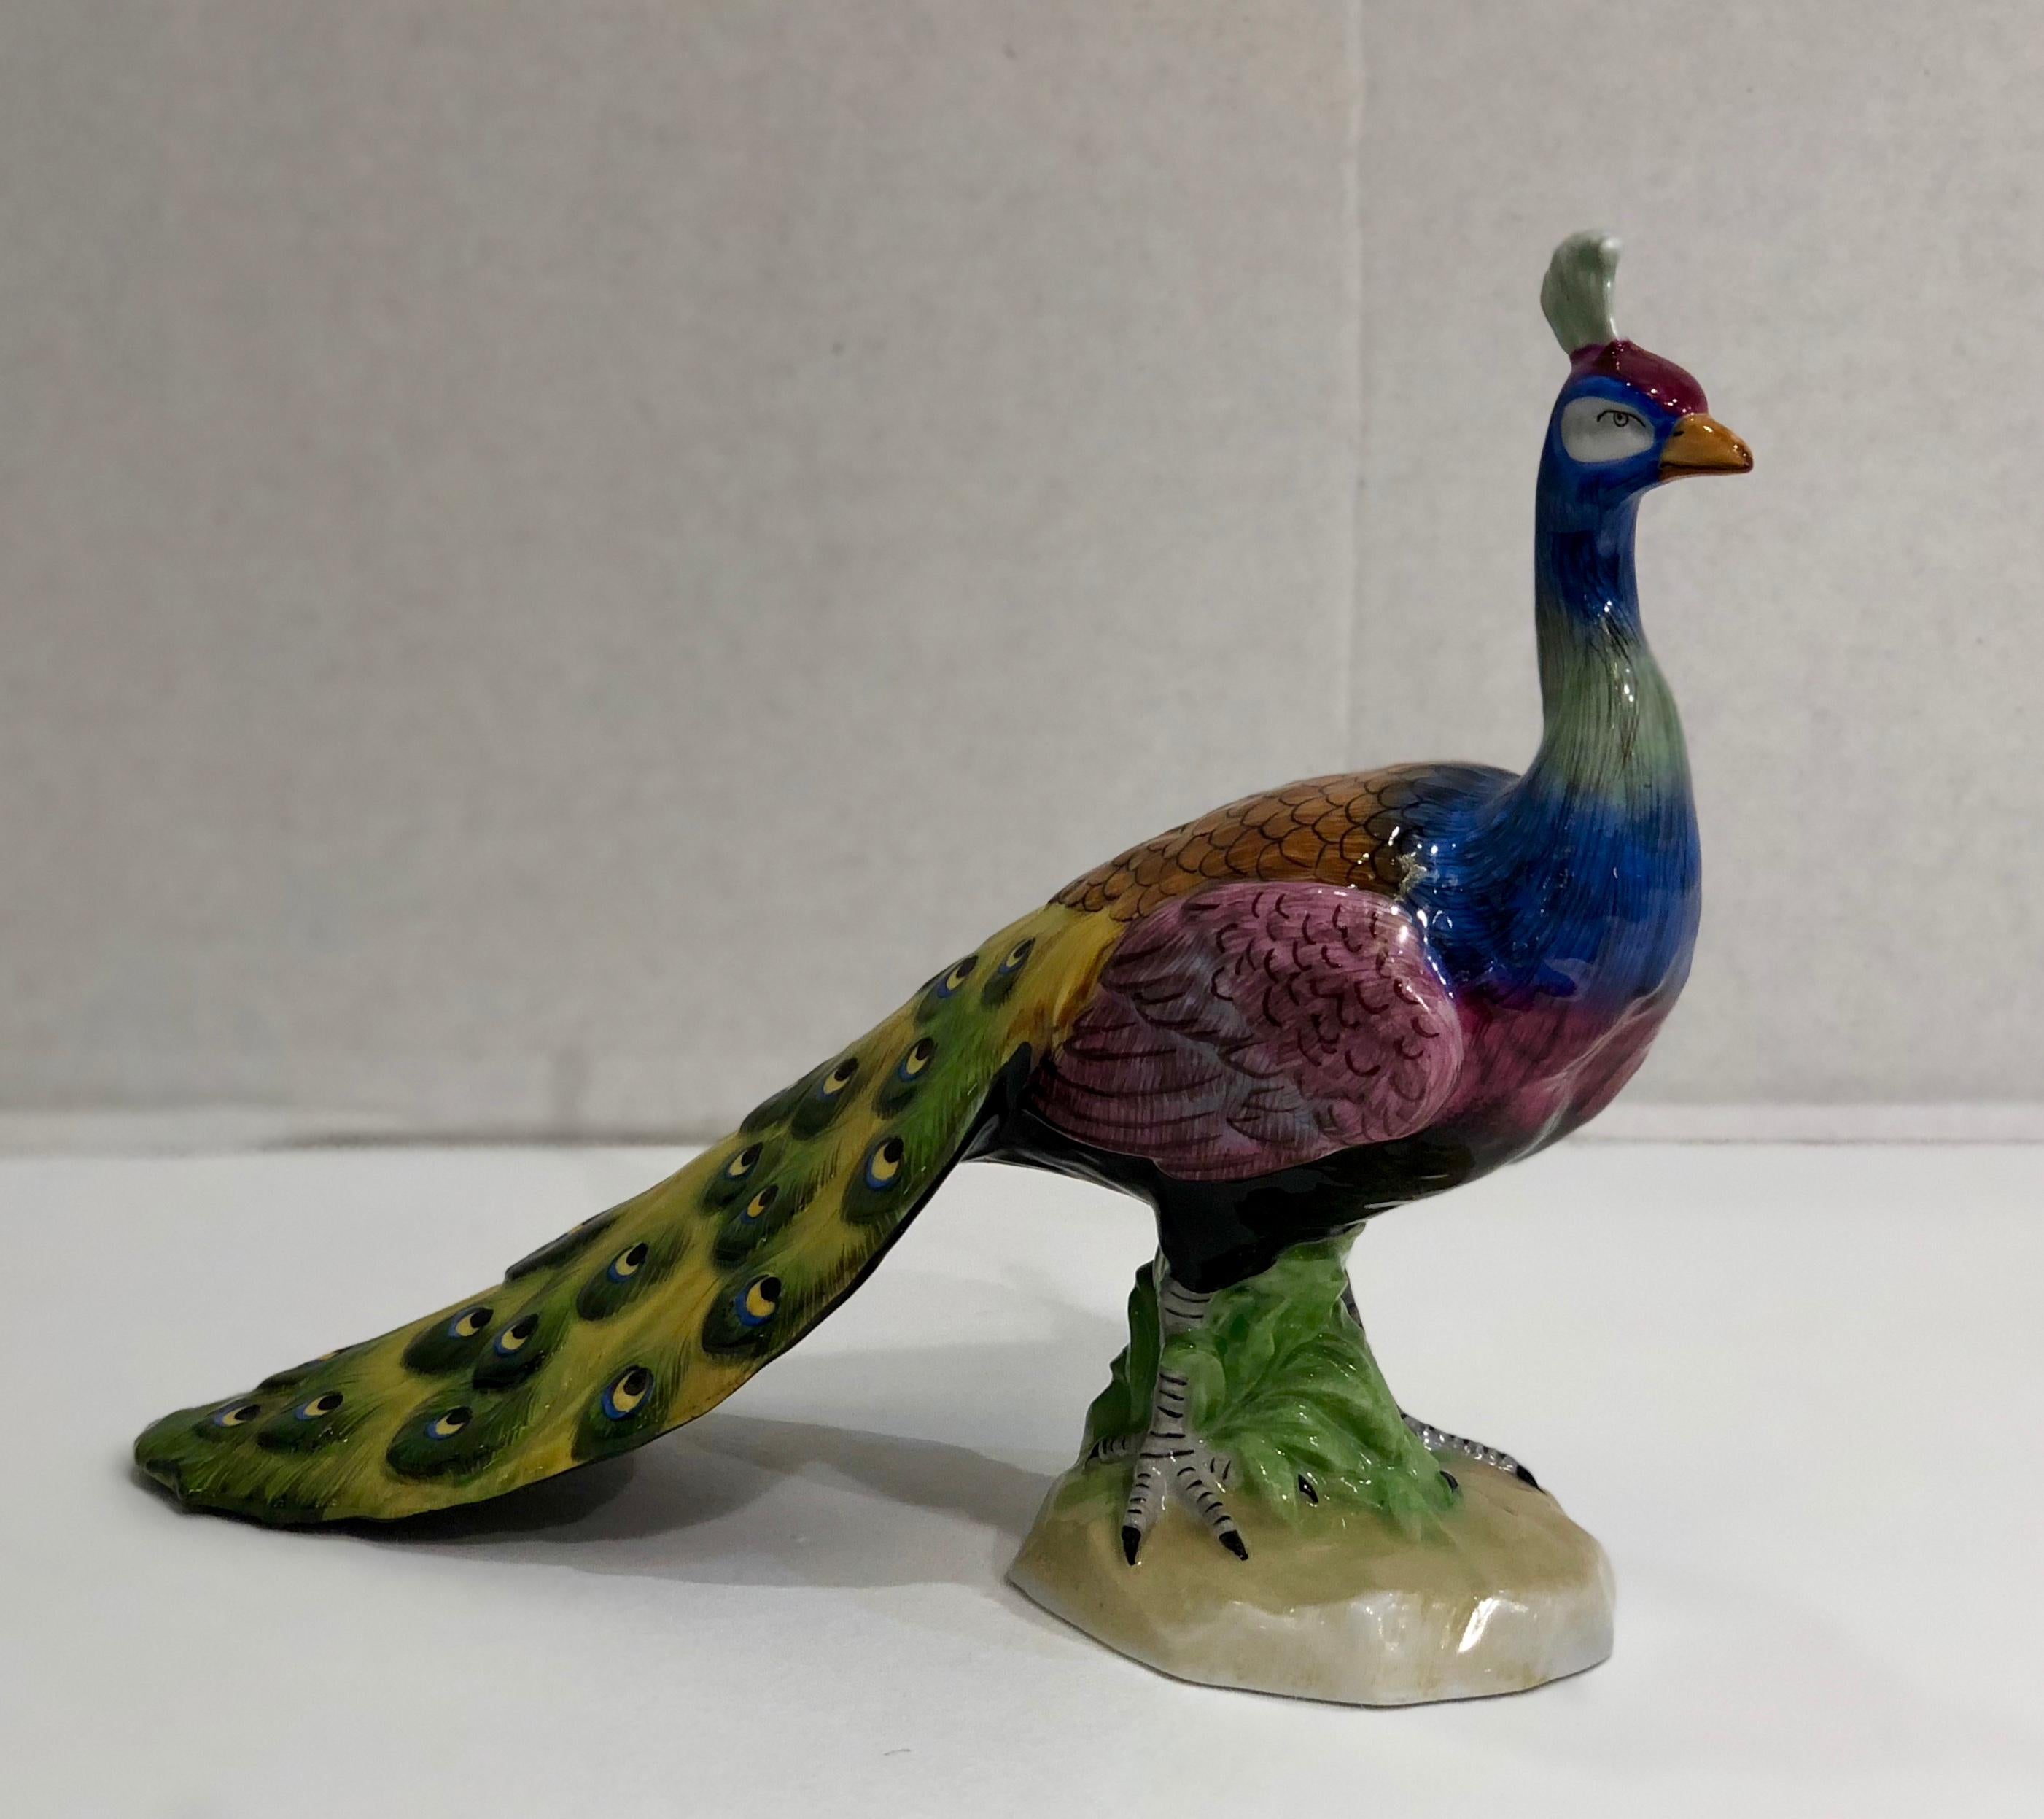 Exquise Dresden Porcelain Peacock Tail Closed Facing Forward Figurine Germany en vente 1